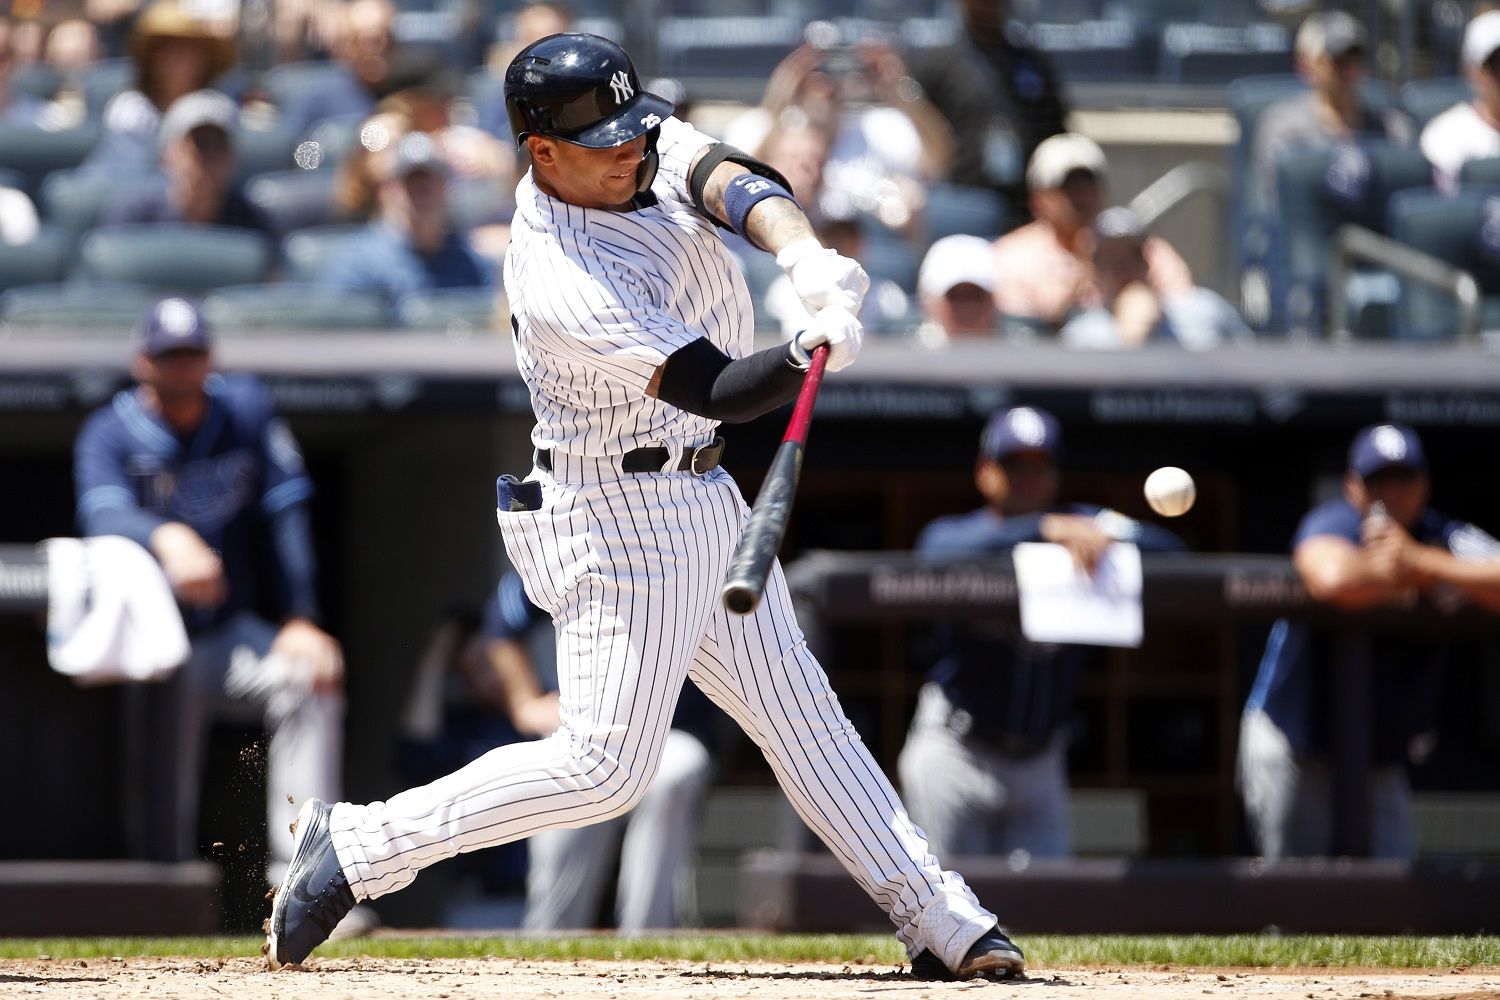 New York Yankees' Gleyber Torres hits an RBI double during the second inning of a baseball game against the Tampa Bay Rays on Saturday, June 16, 2018, in New York. (AP Photo/Adam Hunger)